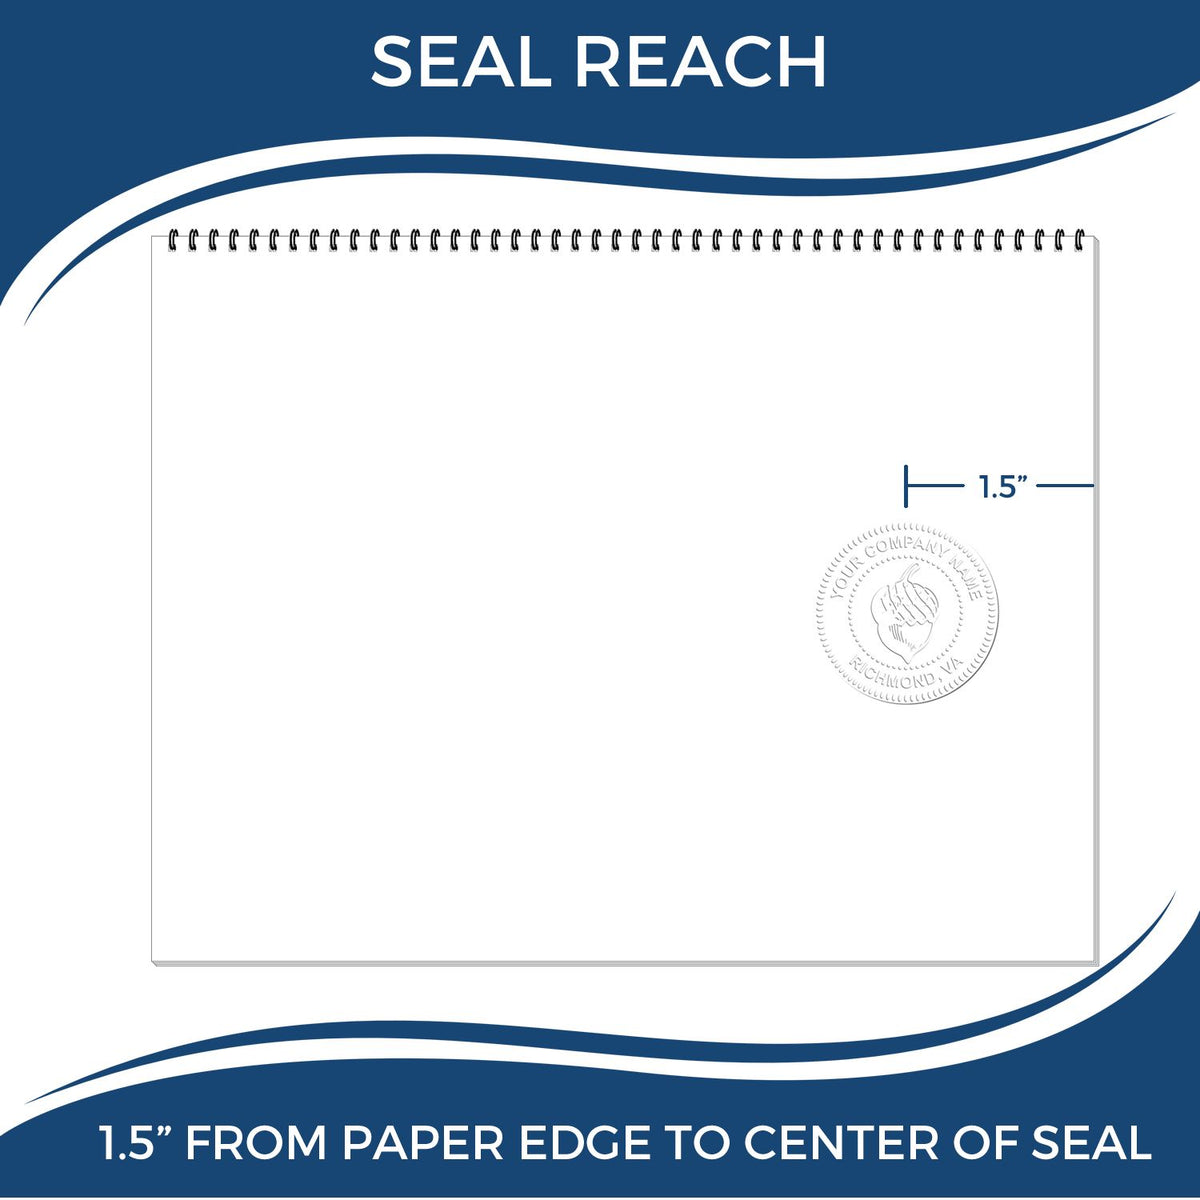 An infographic showing the seal reach which is represented by a ruler and a miniature seal image of the Gift Utah Landscape Architect Seal